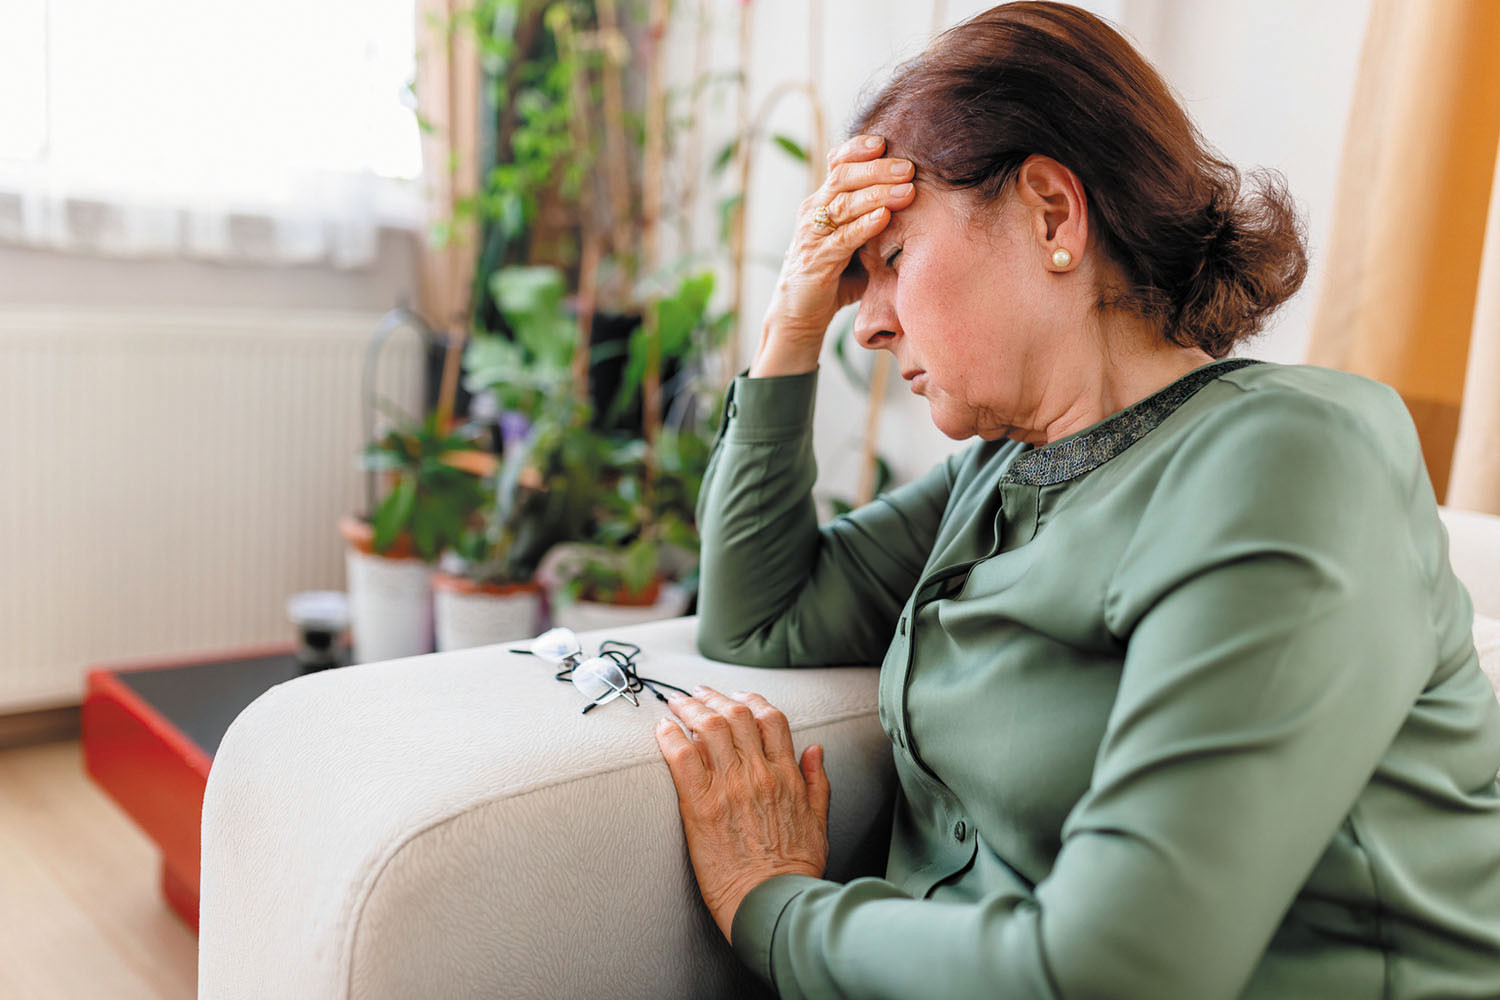 photo of a woman experiencing fatigue sitting down holding her right hand to her forehead